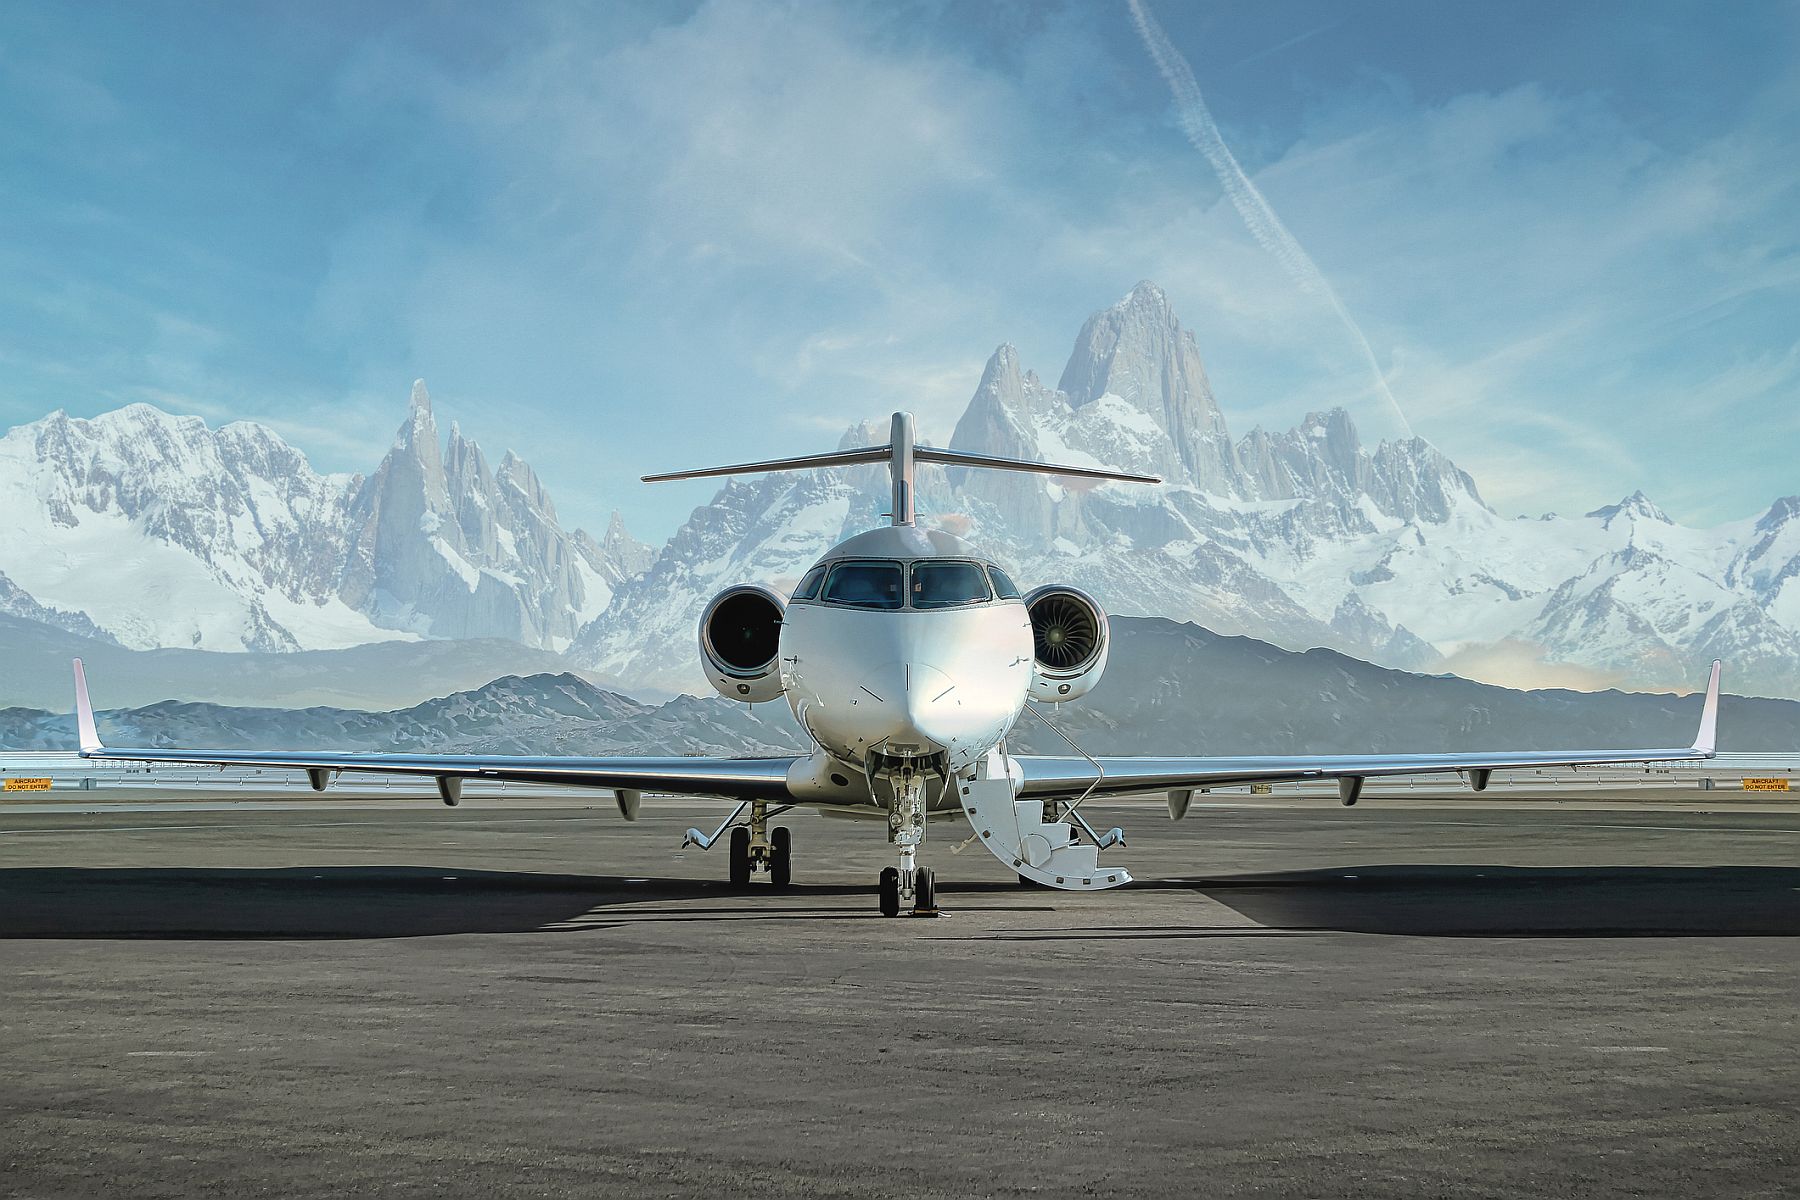 My trip on the new 'affordable' private jet